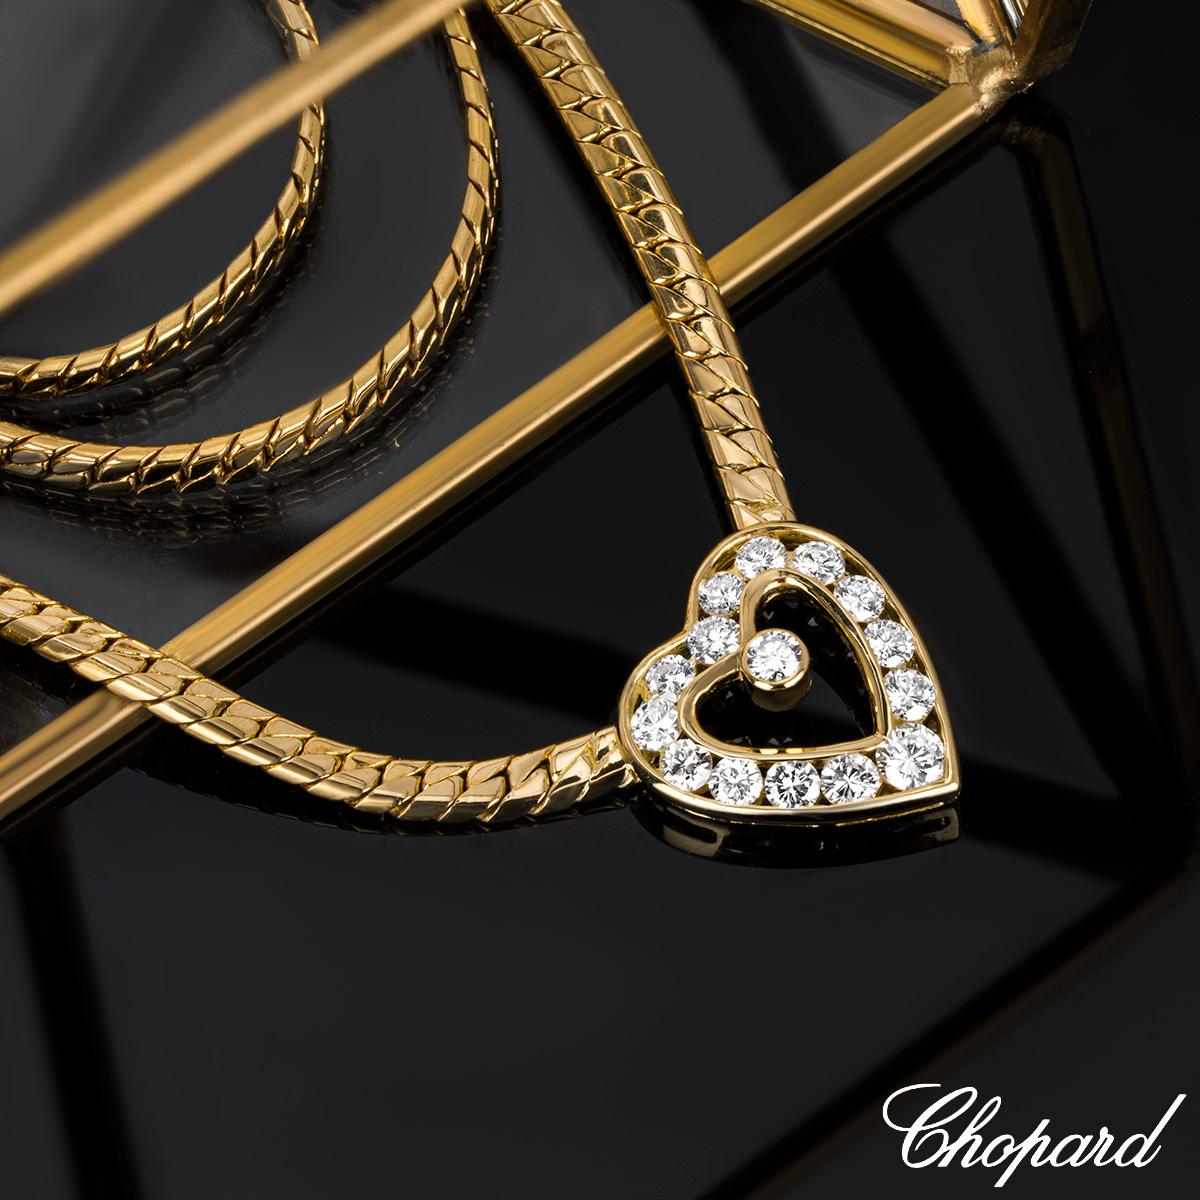 Chopard Yellow Gold Diamond Heart Necklace 0.94ct TDW 3